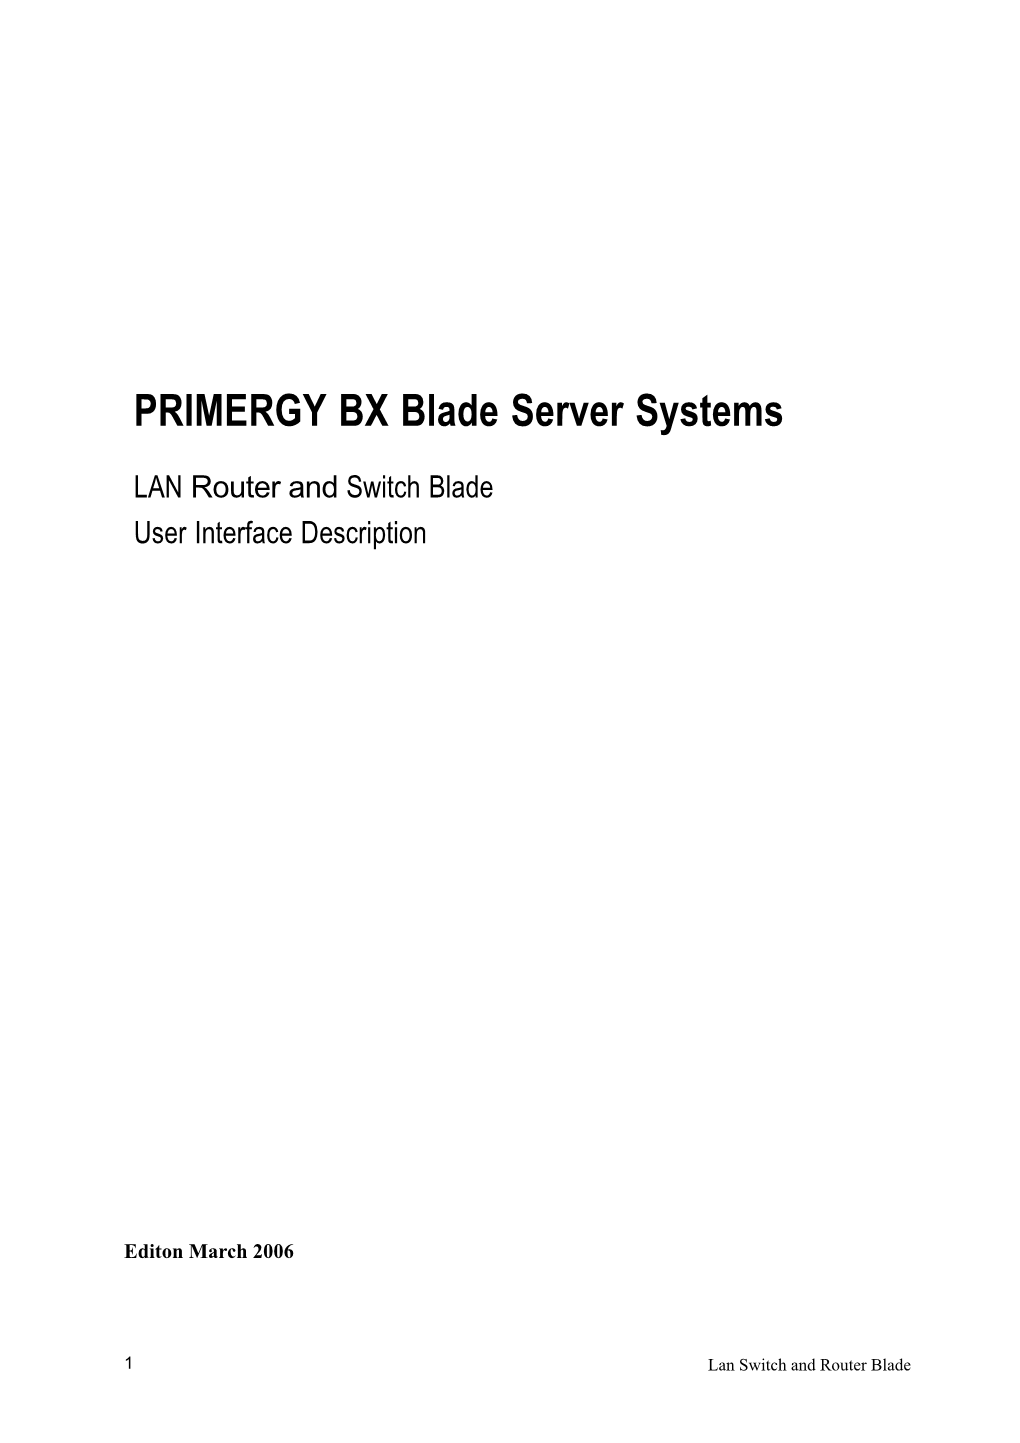 PRIMERGY BX Blade Server Systems LAN Router and Switch Blade